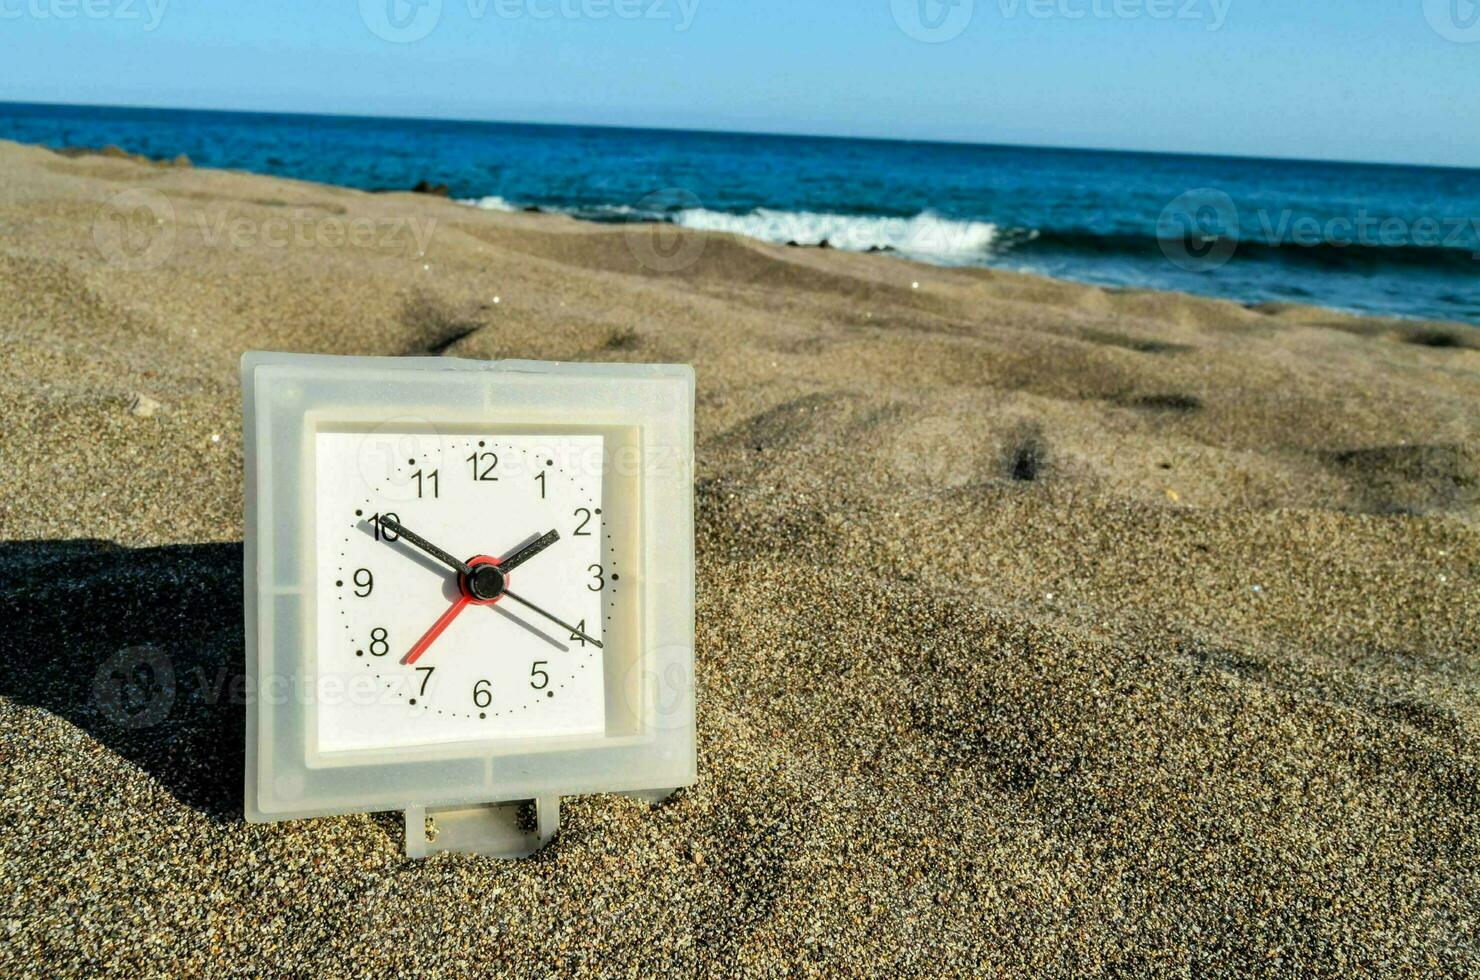 a clock on the beach with the ocean in the background photo